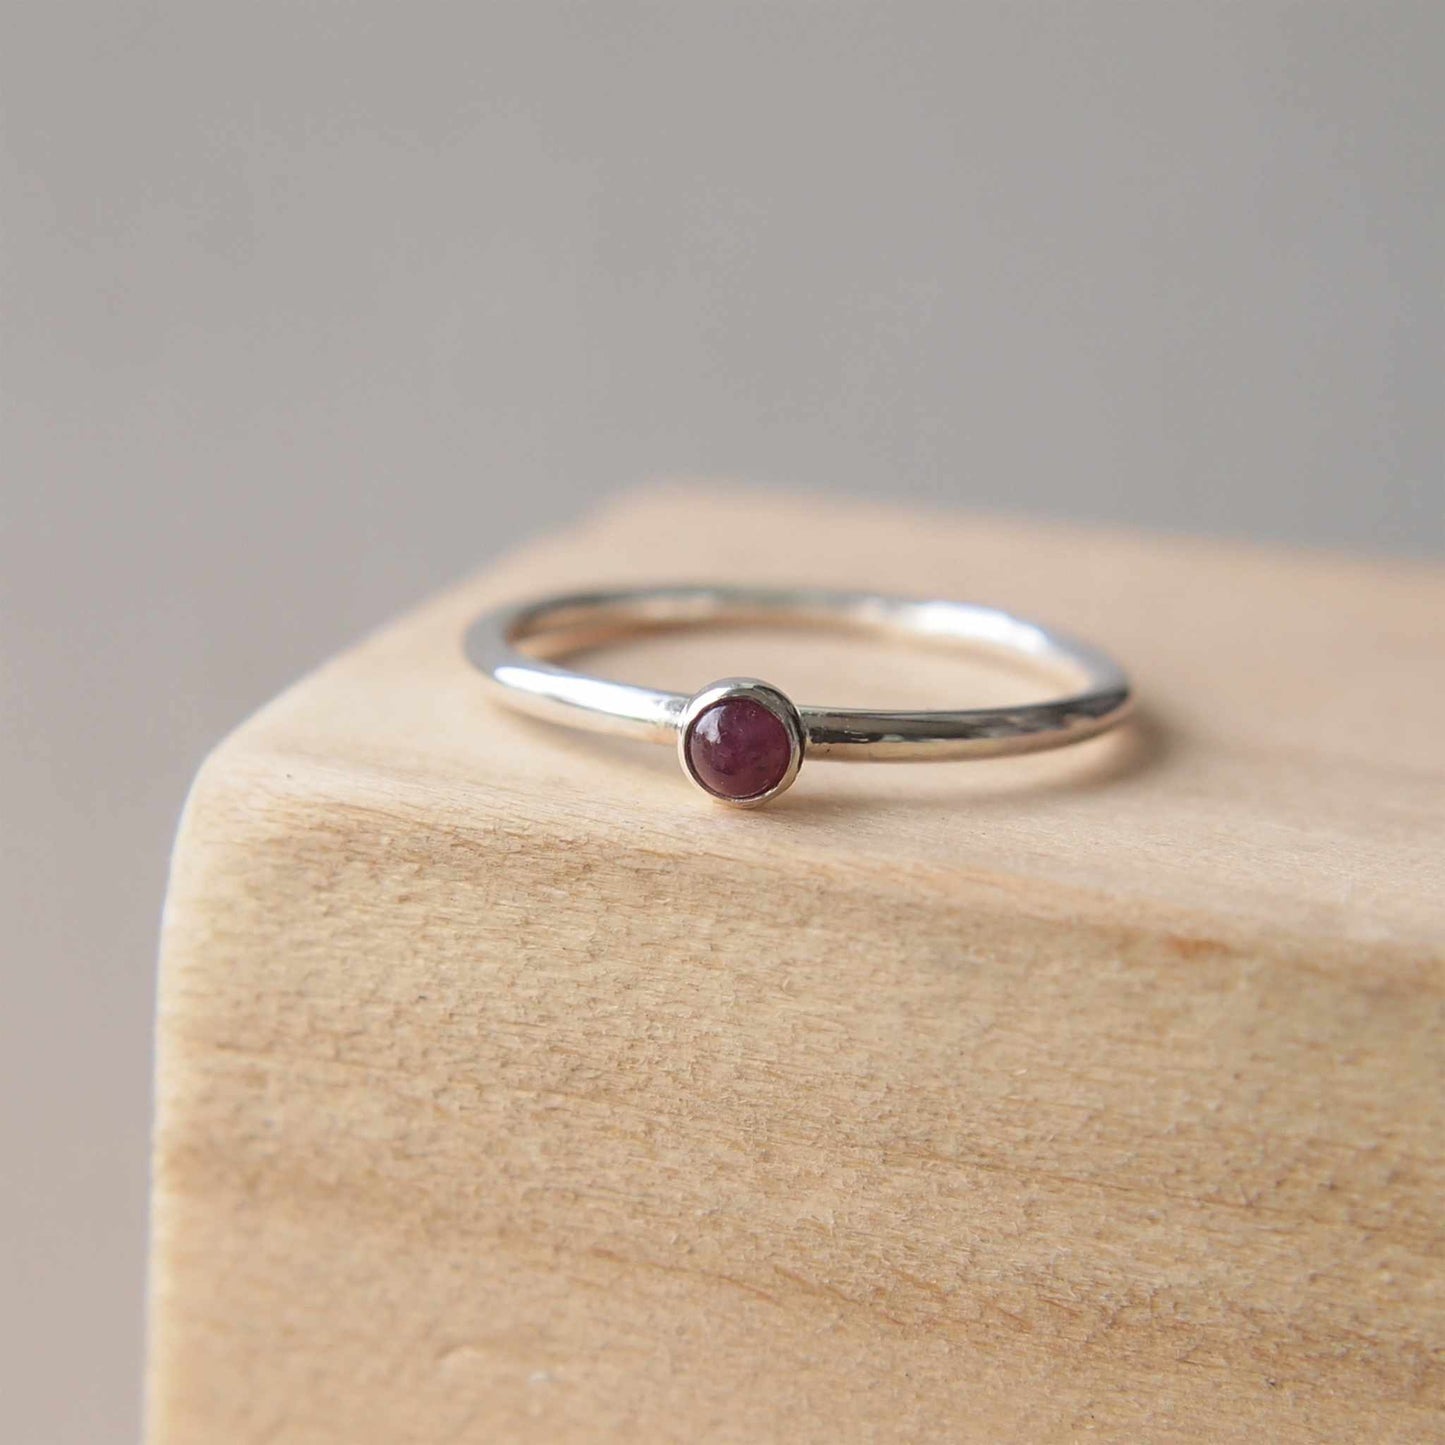 Ruby and Sterling Silver Birthstone RIng for July. The ring is simple in style on a plain fully round band with a small round Ruby in the centre. The ring is handmade to your size by maram jewellery in Scotland